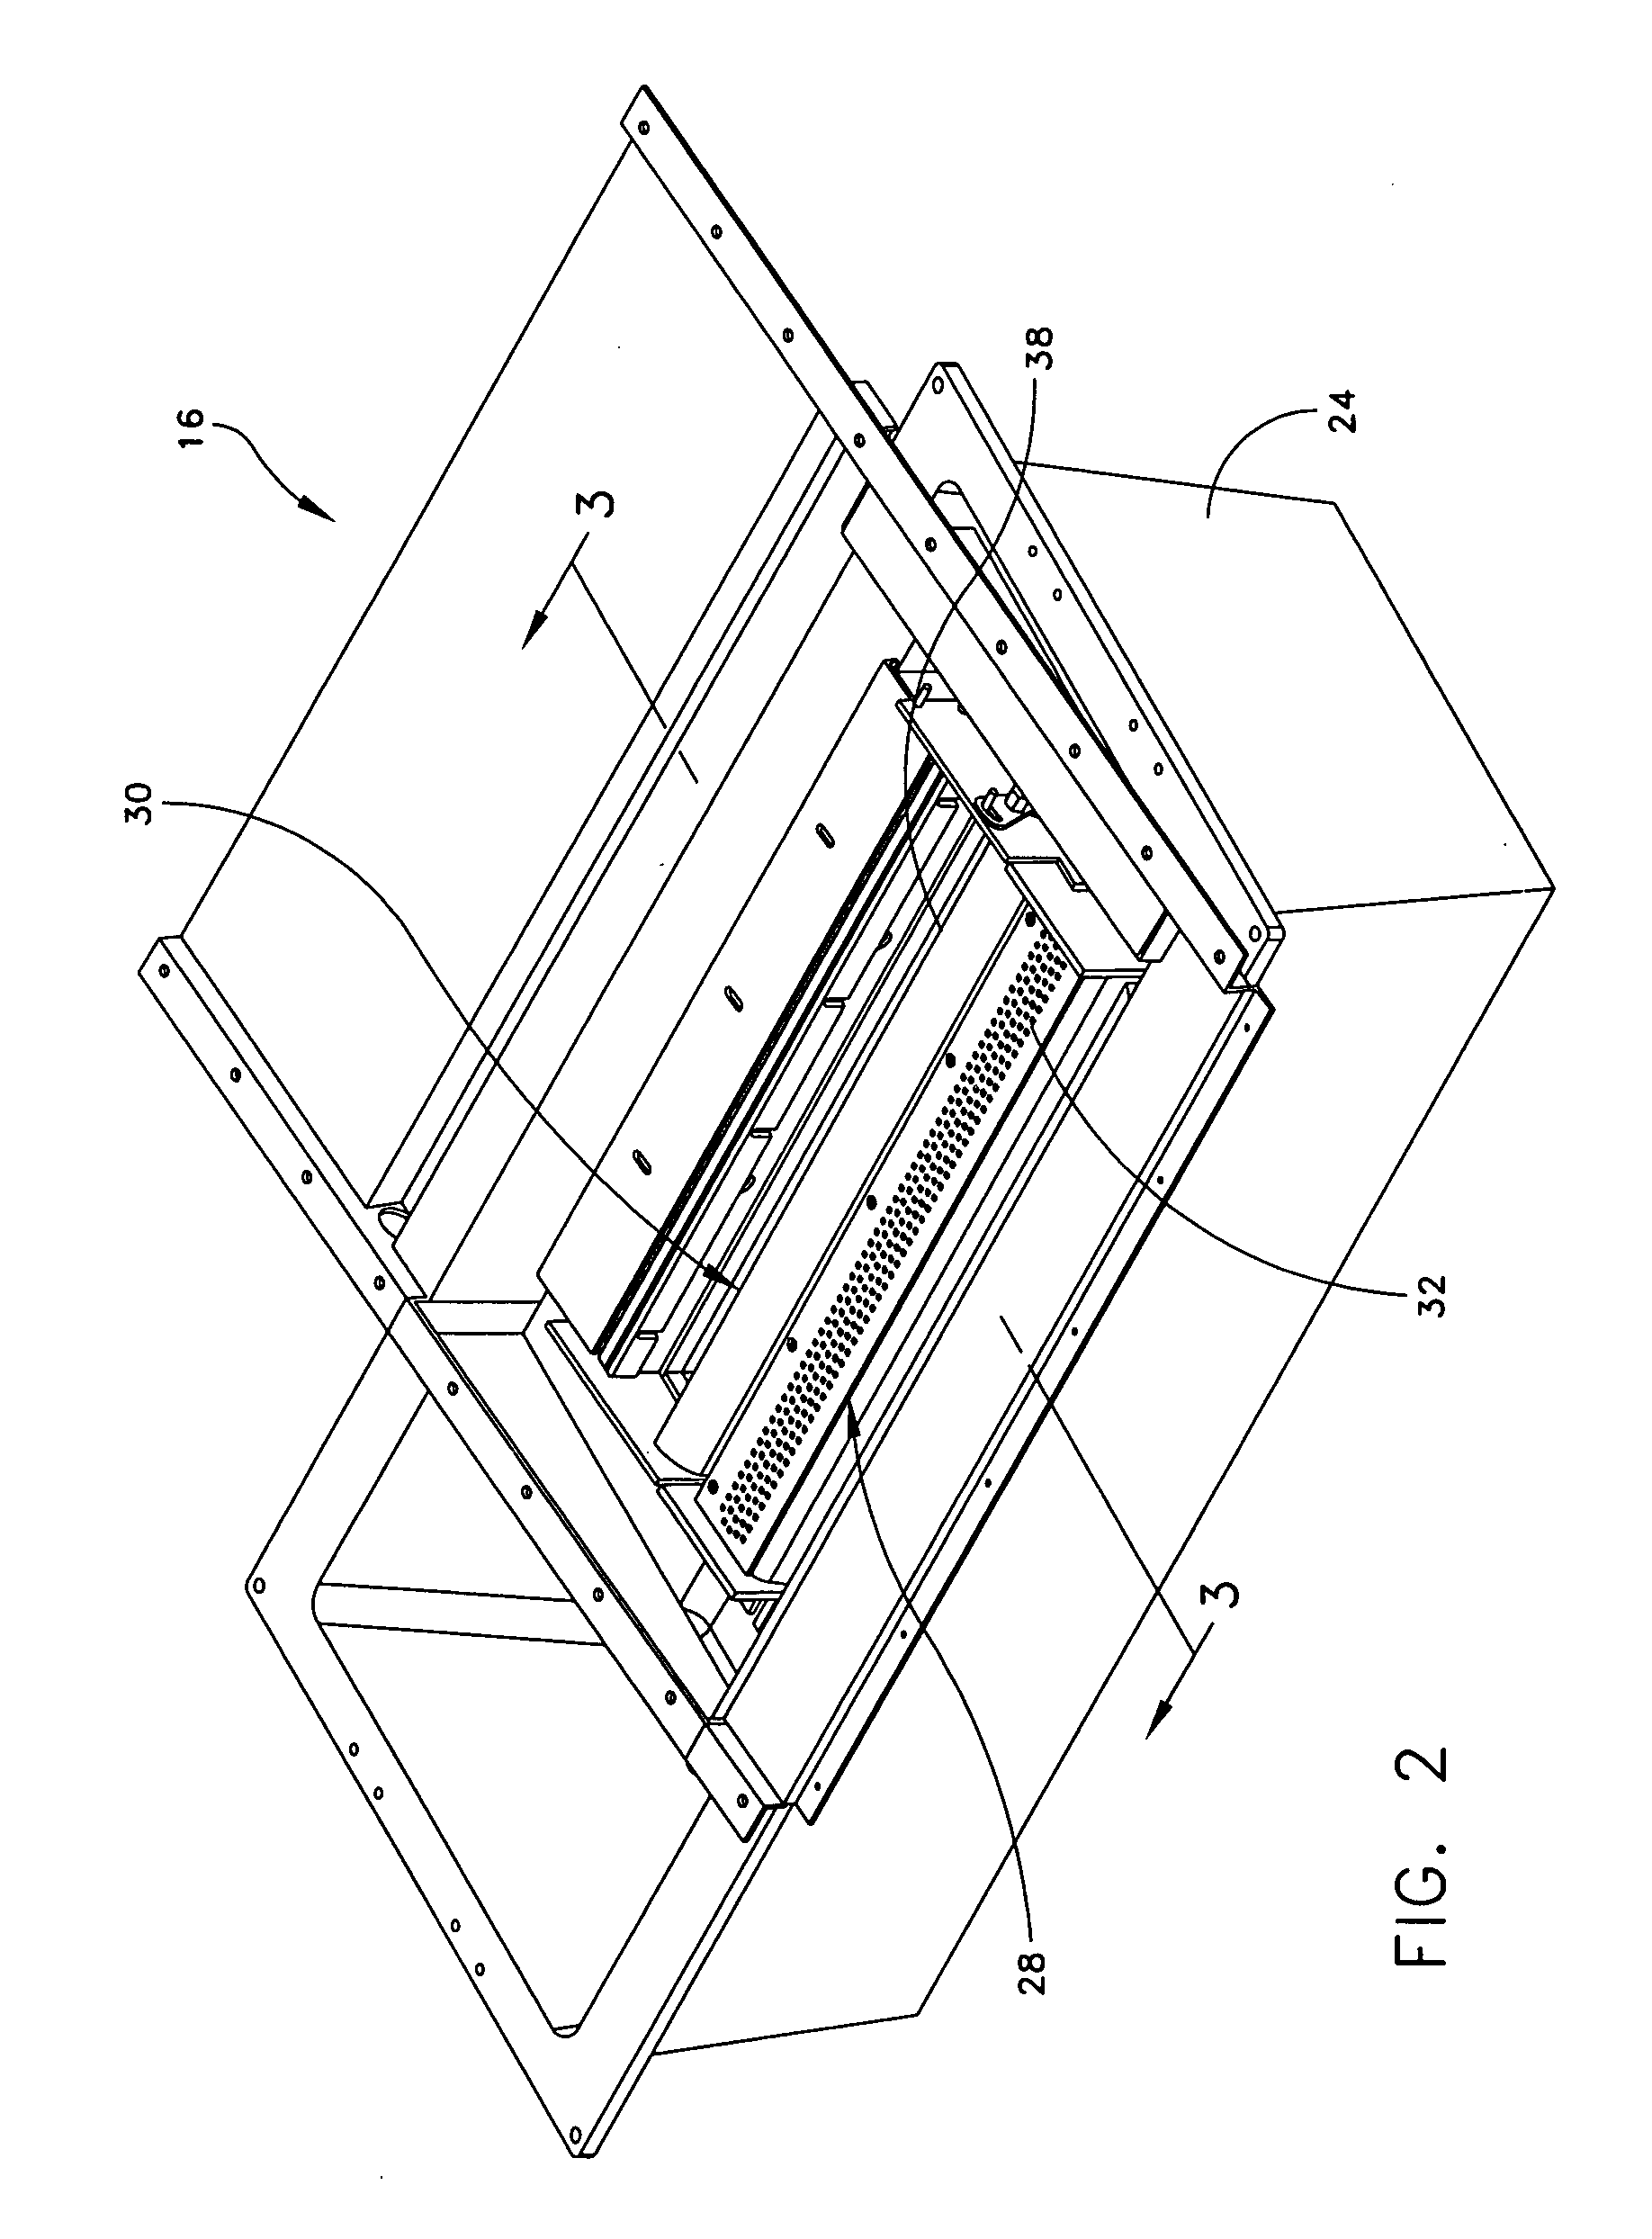 Method and apparatus for wave soldering an electronic substrate